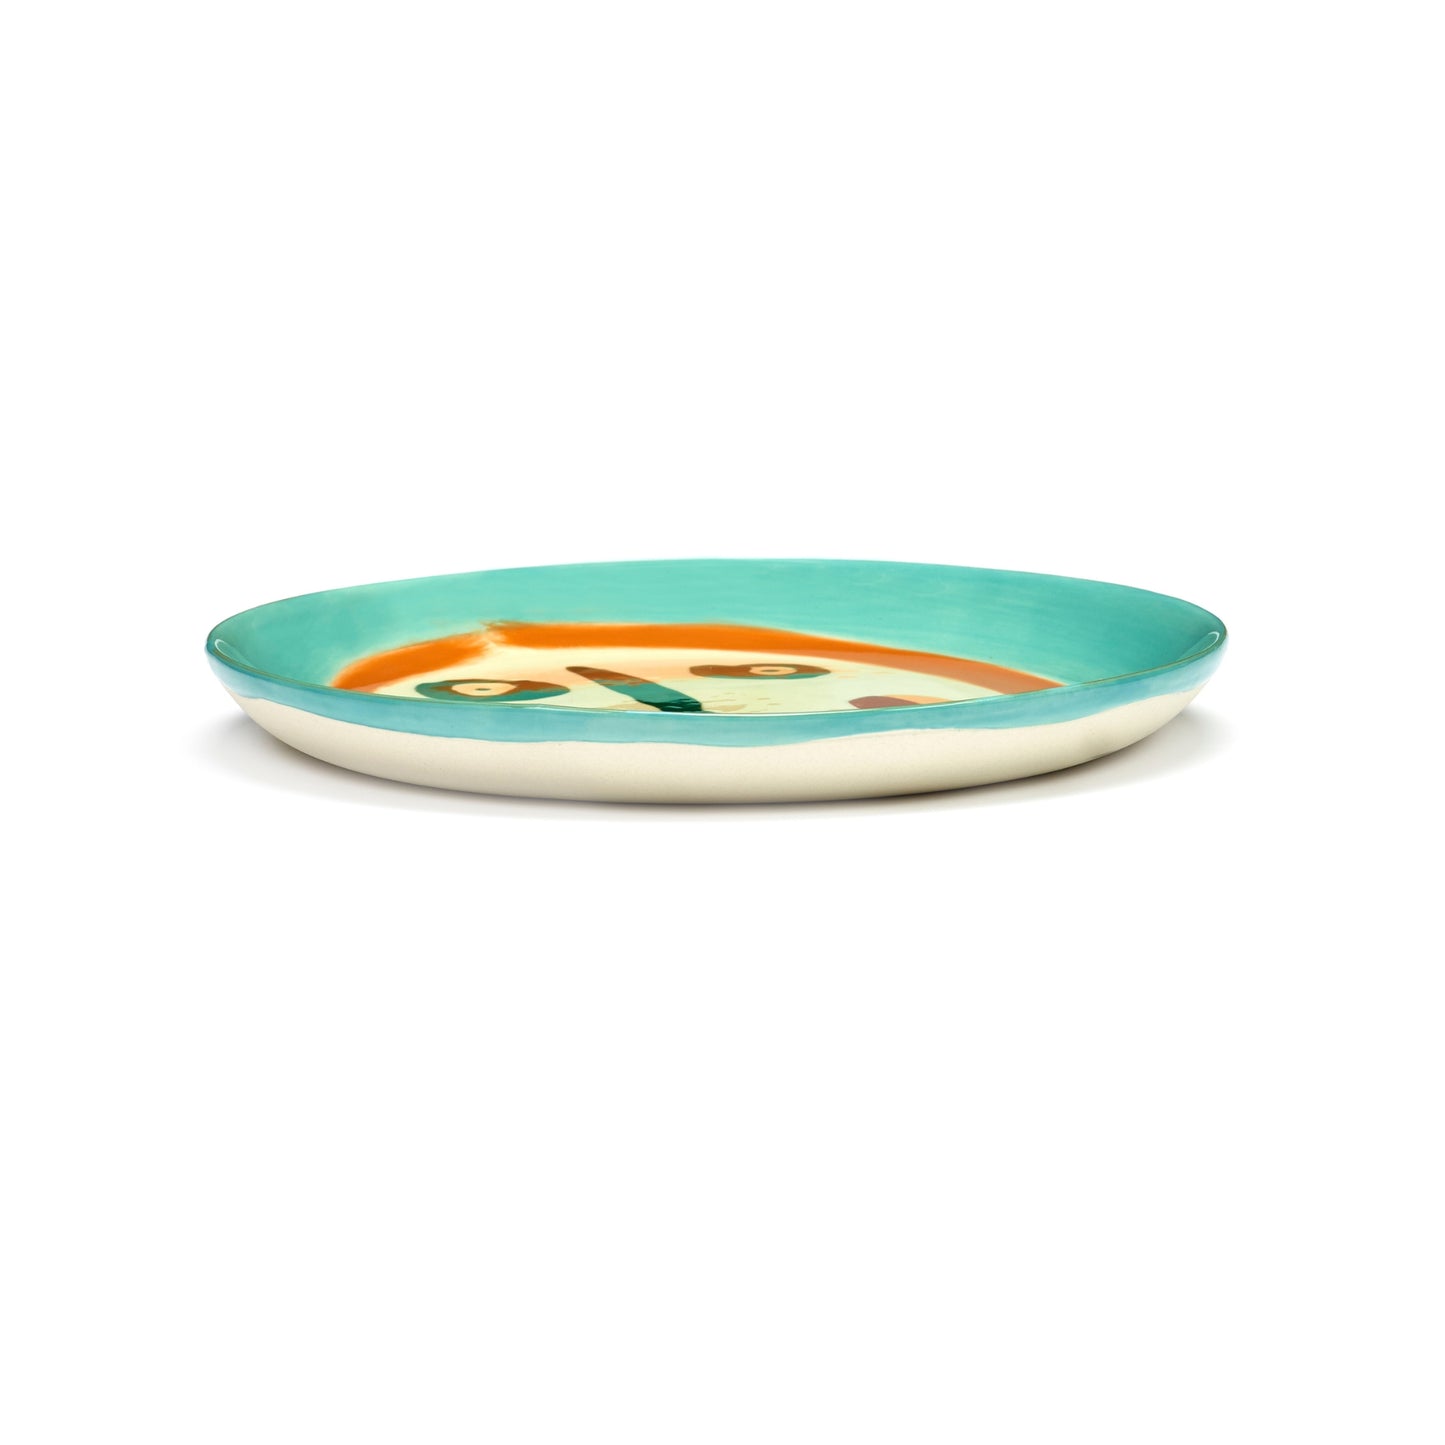 Plate Feast S Face 2 Set Of 2